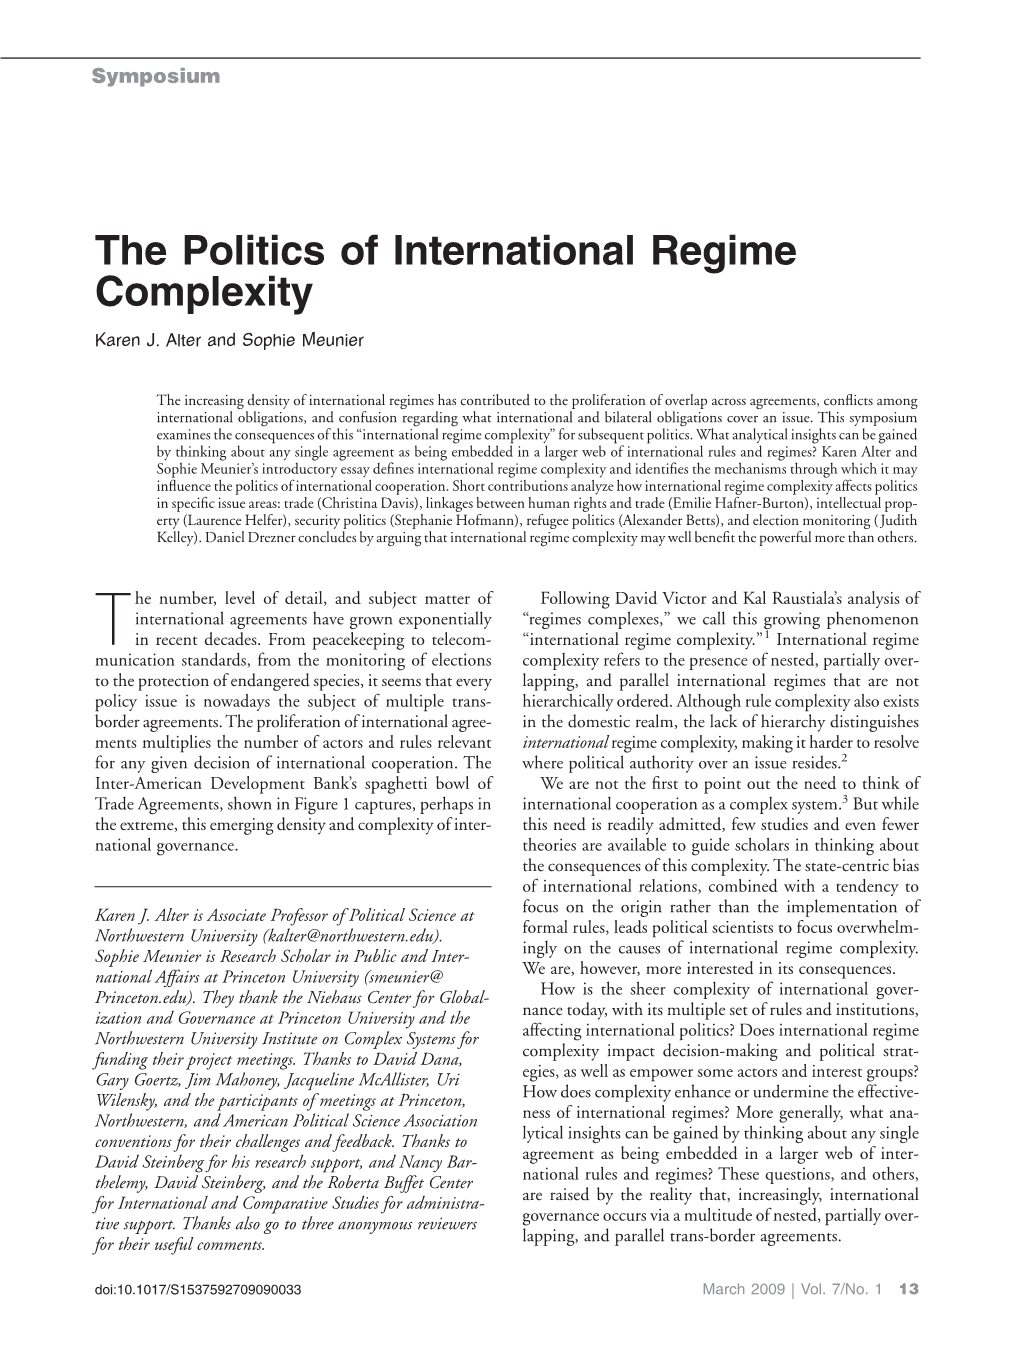 The Politics of International Regime Complexity. with Sophie Meunier